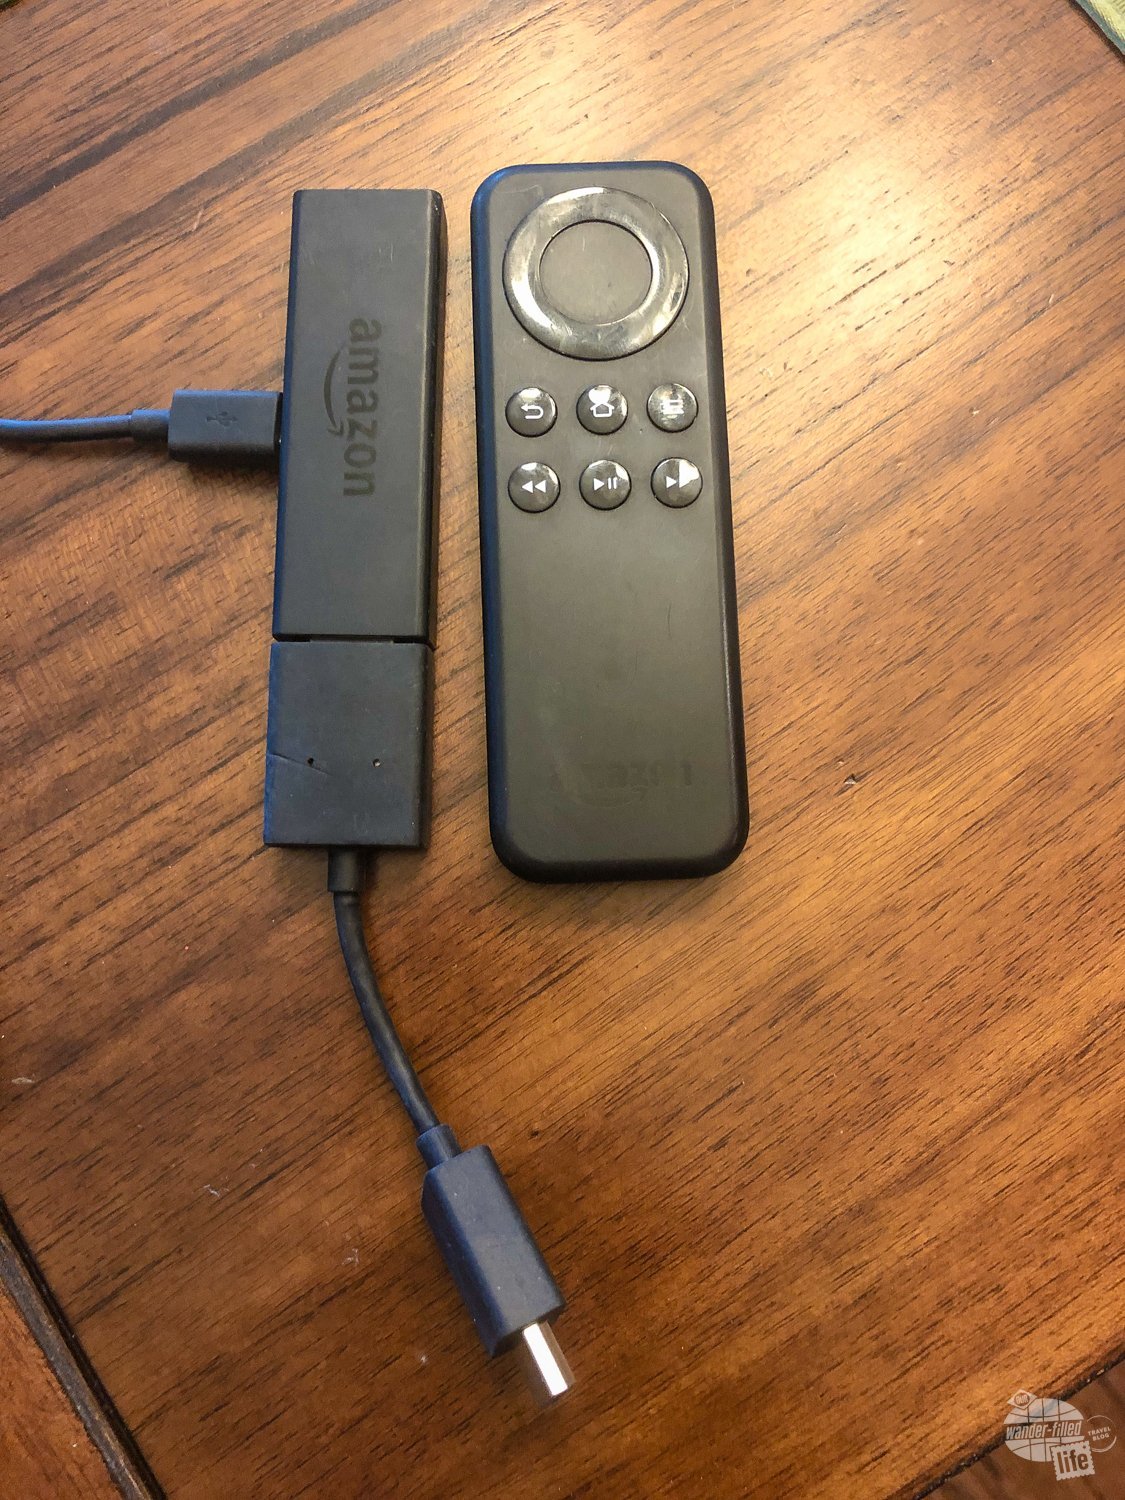 The Amazon Fire Stick is great for traveling with or without your camper.